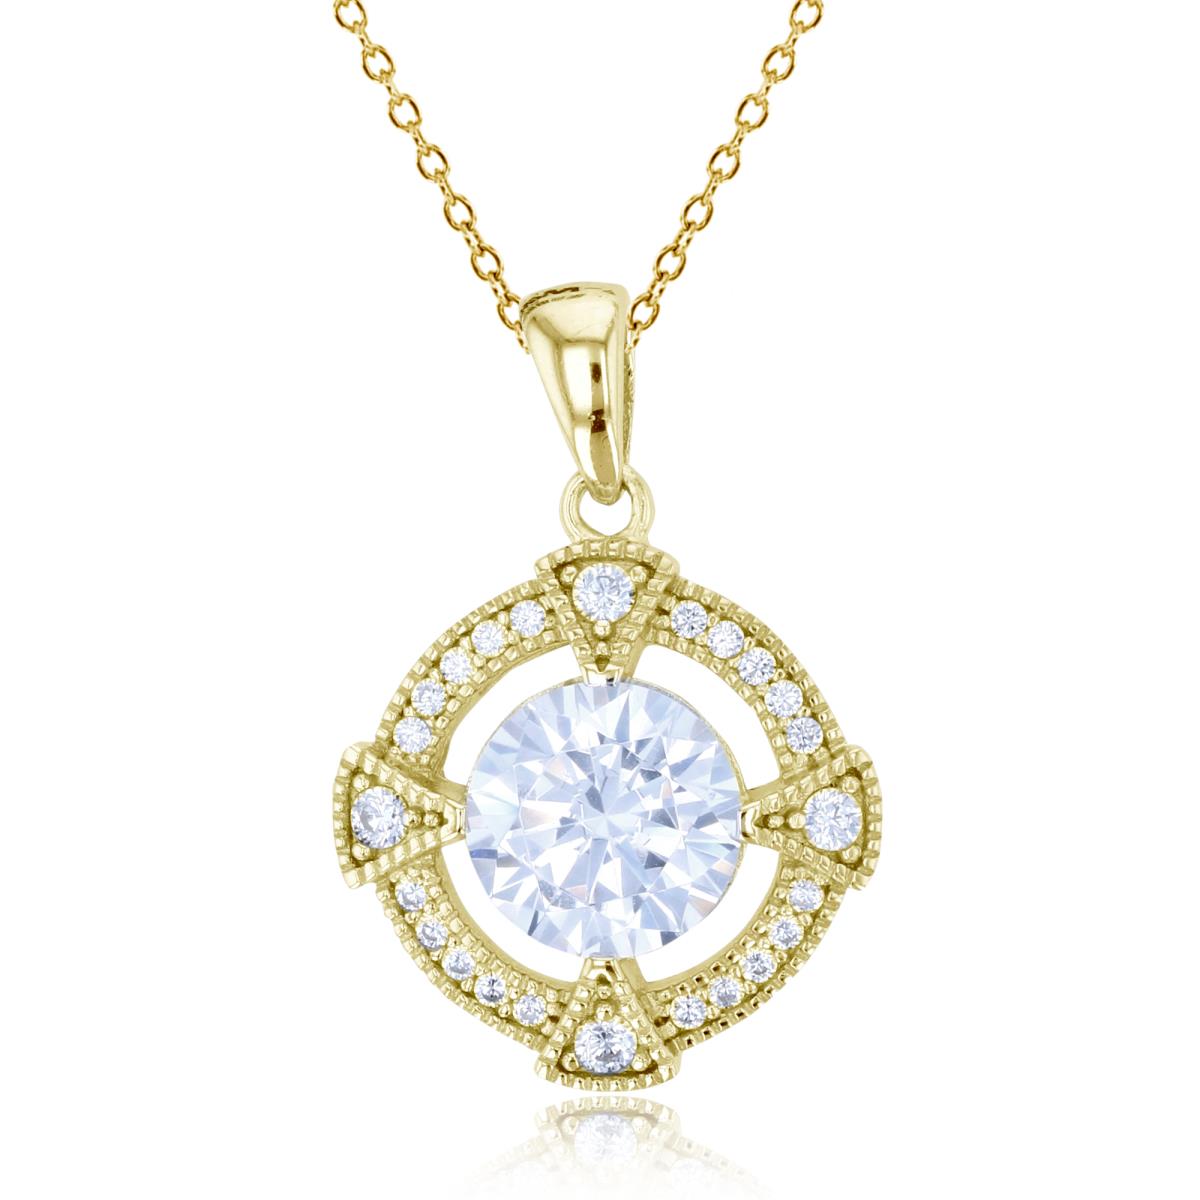 Sterling Silver+1Micron Yellow Gold 8mm Rnd Center CZ Milgrain Halo Circle 18"Necklace